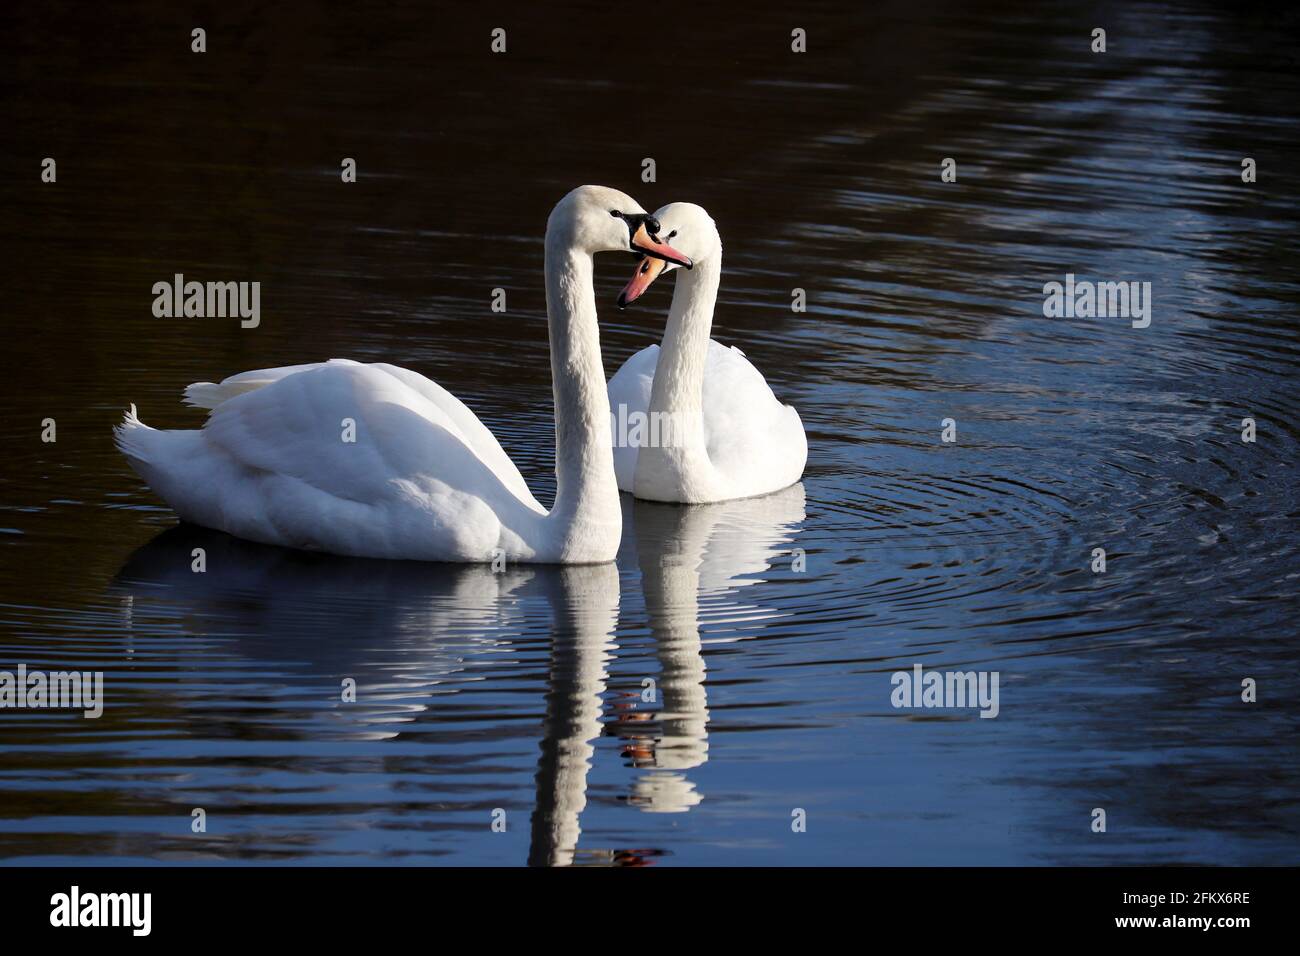 Couple of white swans swimming on a lake, reflection on water surface. Romantic scene, concept of love and loyalty Stock Photo